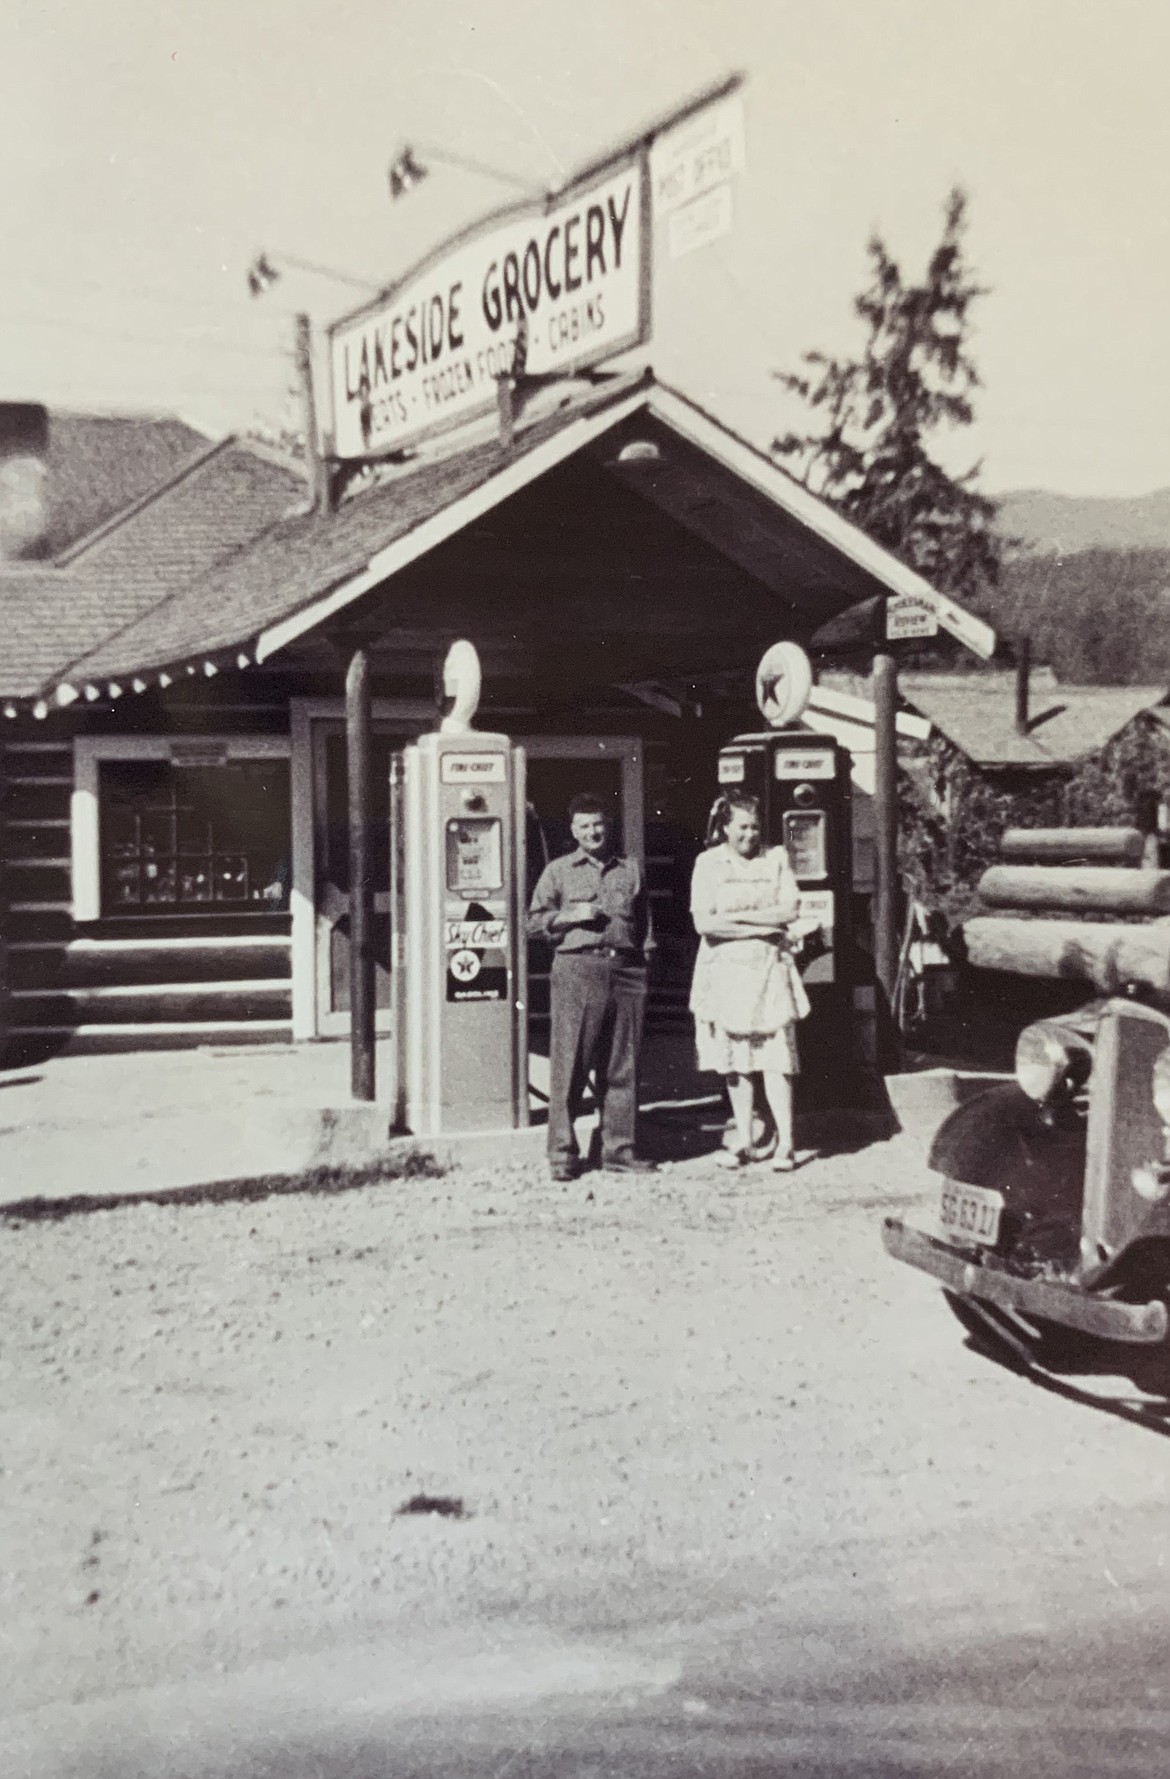 Raymond and Clara Evans are pictured in front of what would become the Lakeside Mercantile. (Courtesy Donny Granger)